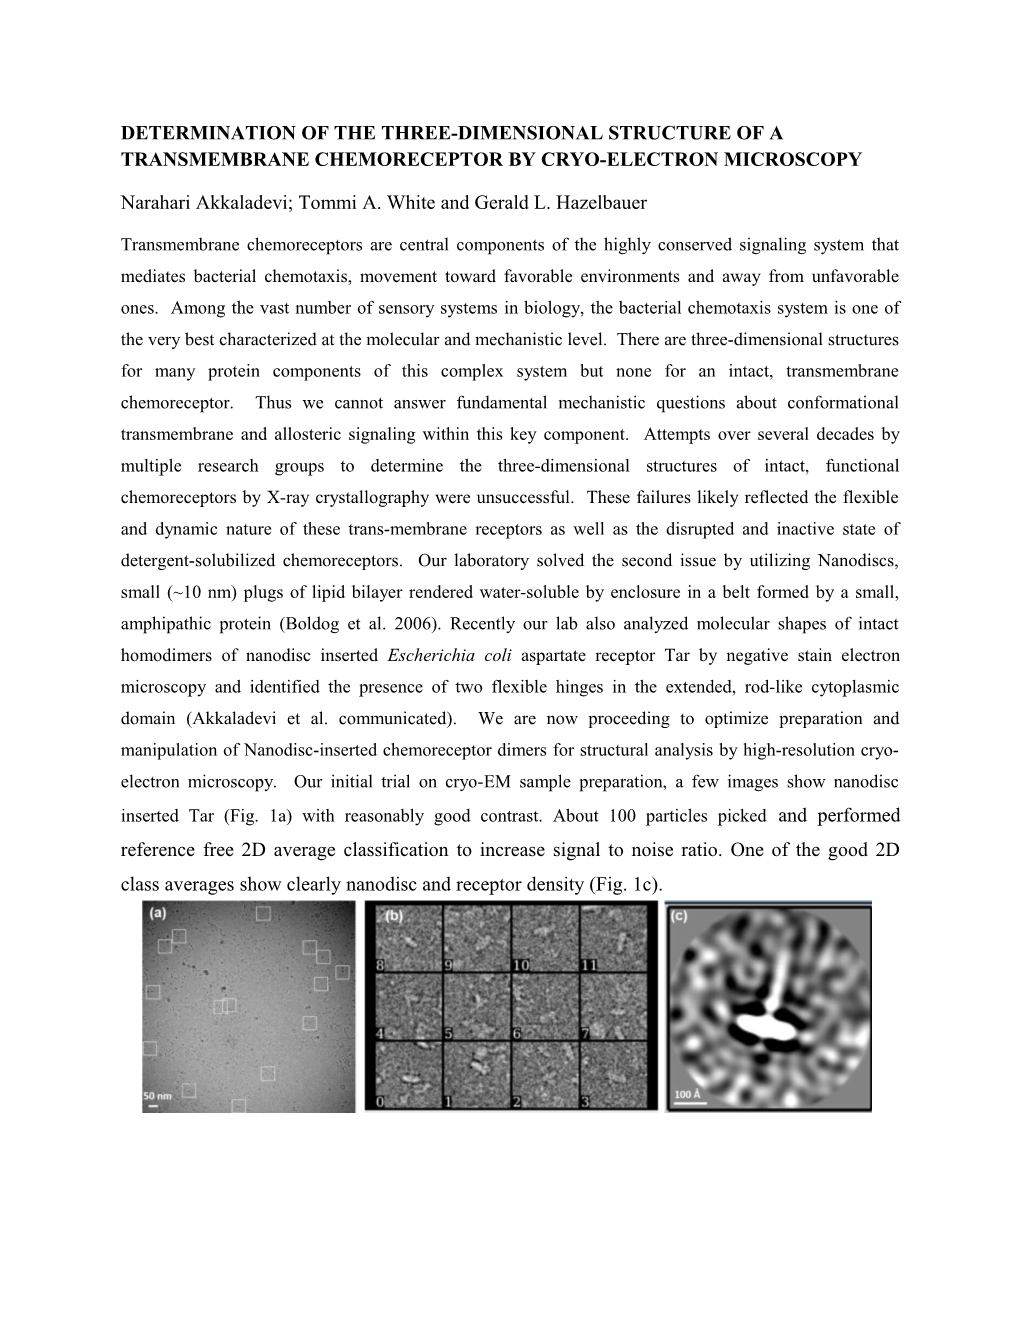 Determination of the Three-Dimensional Structure of a Transmembrane Chemoreceptor By